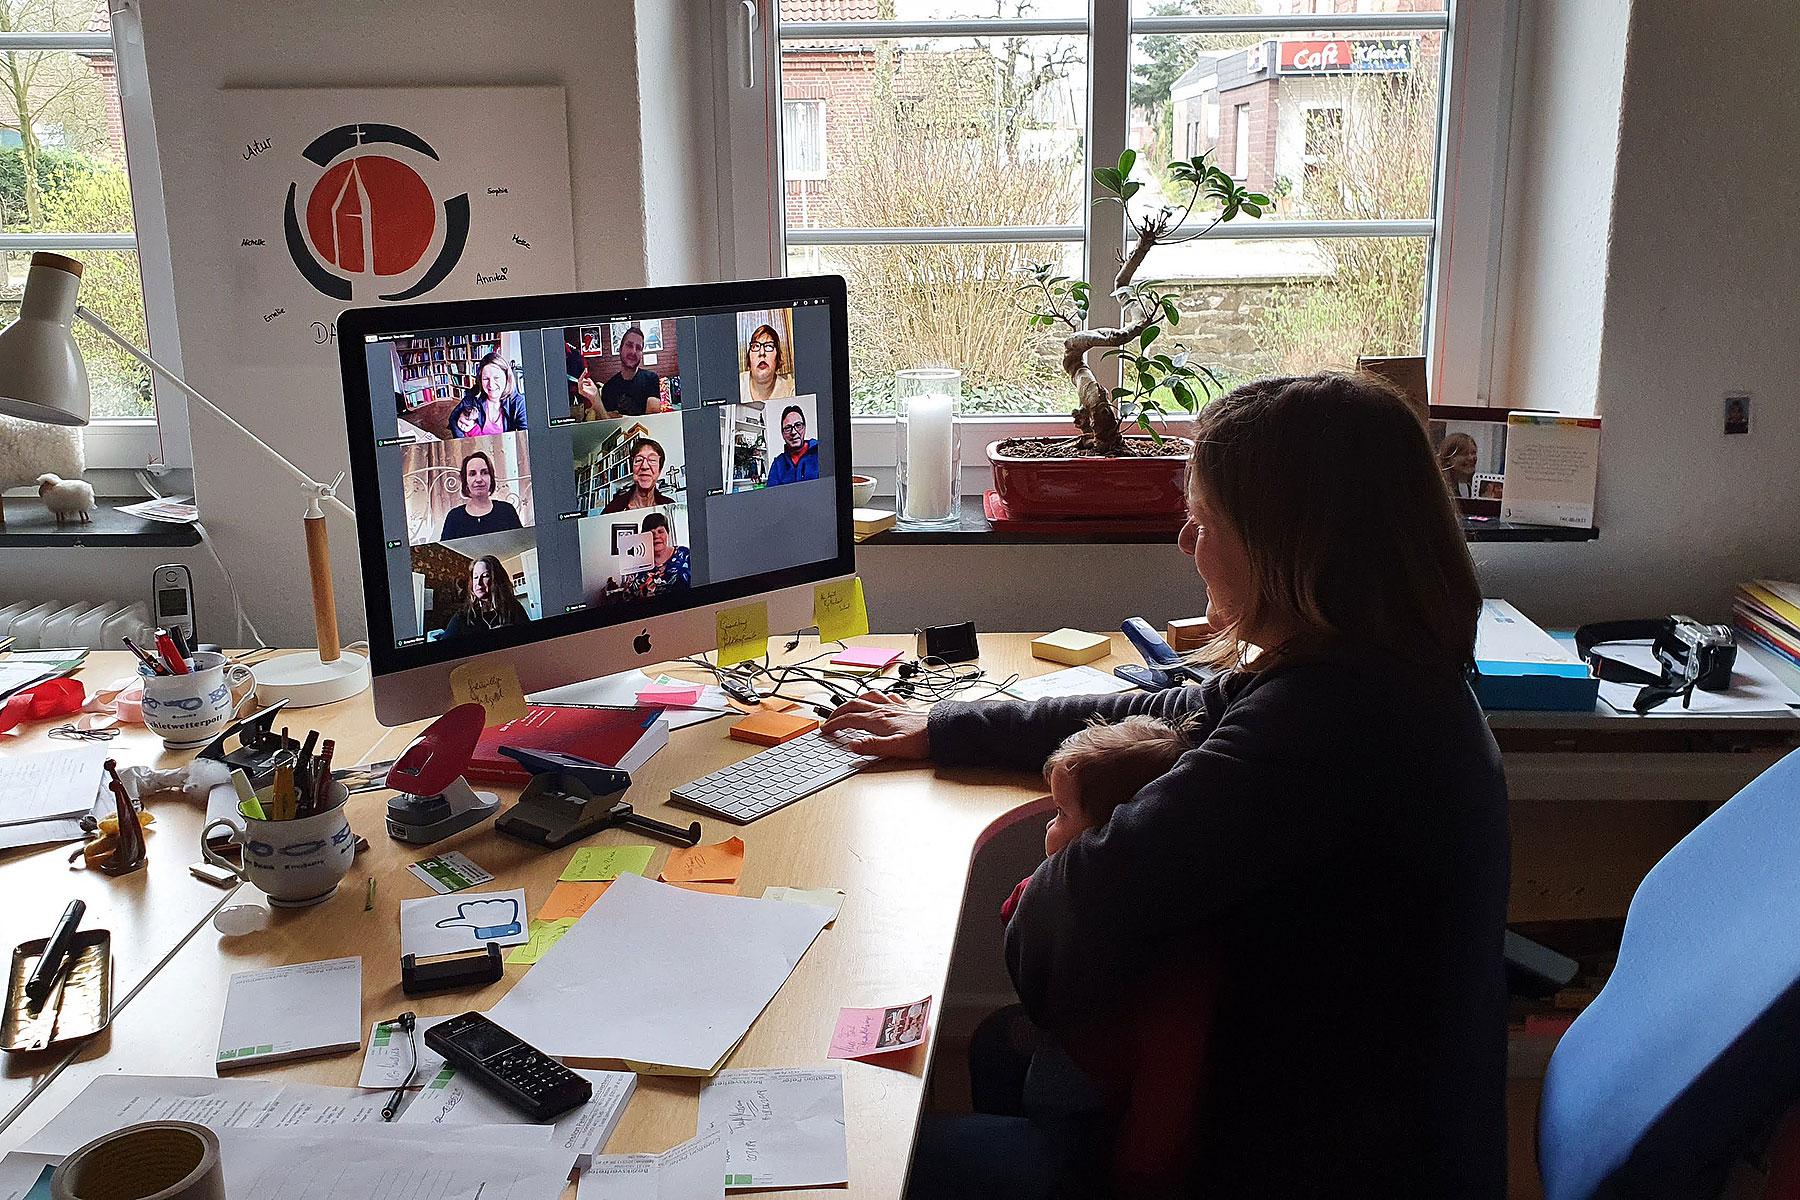 Participants of the LWFs 19th International Seminar for pastors held at the LWF Center Wittenberg in March 2019 connect via video conference. Photo: Michael Grimmsmann